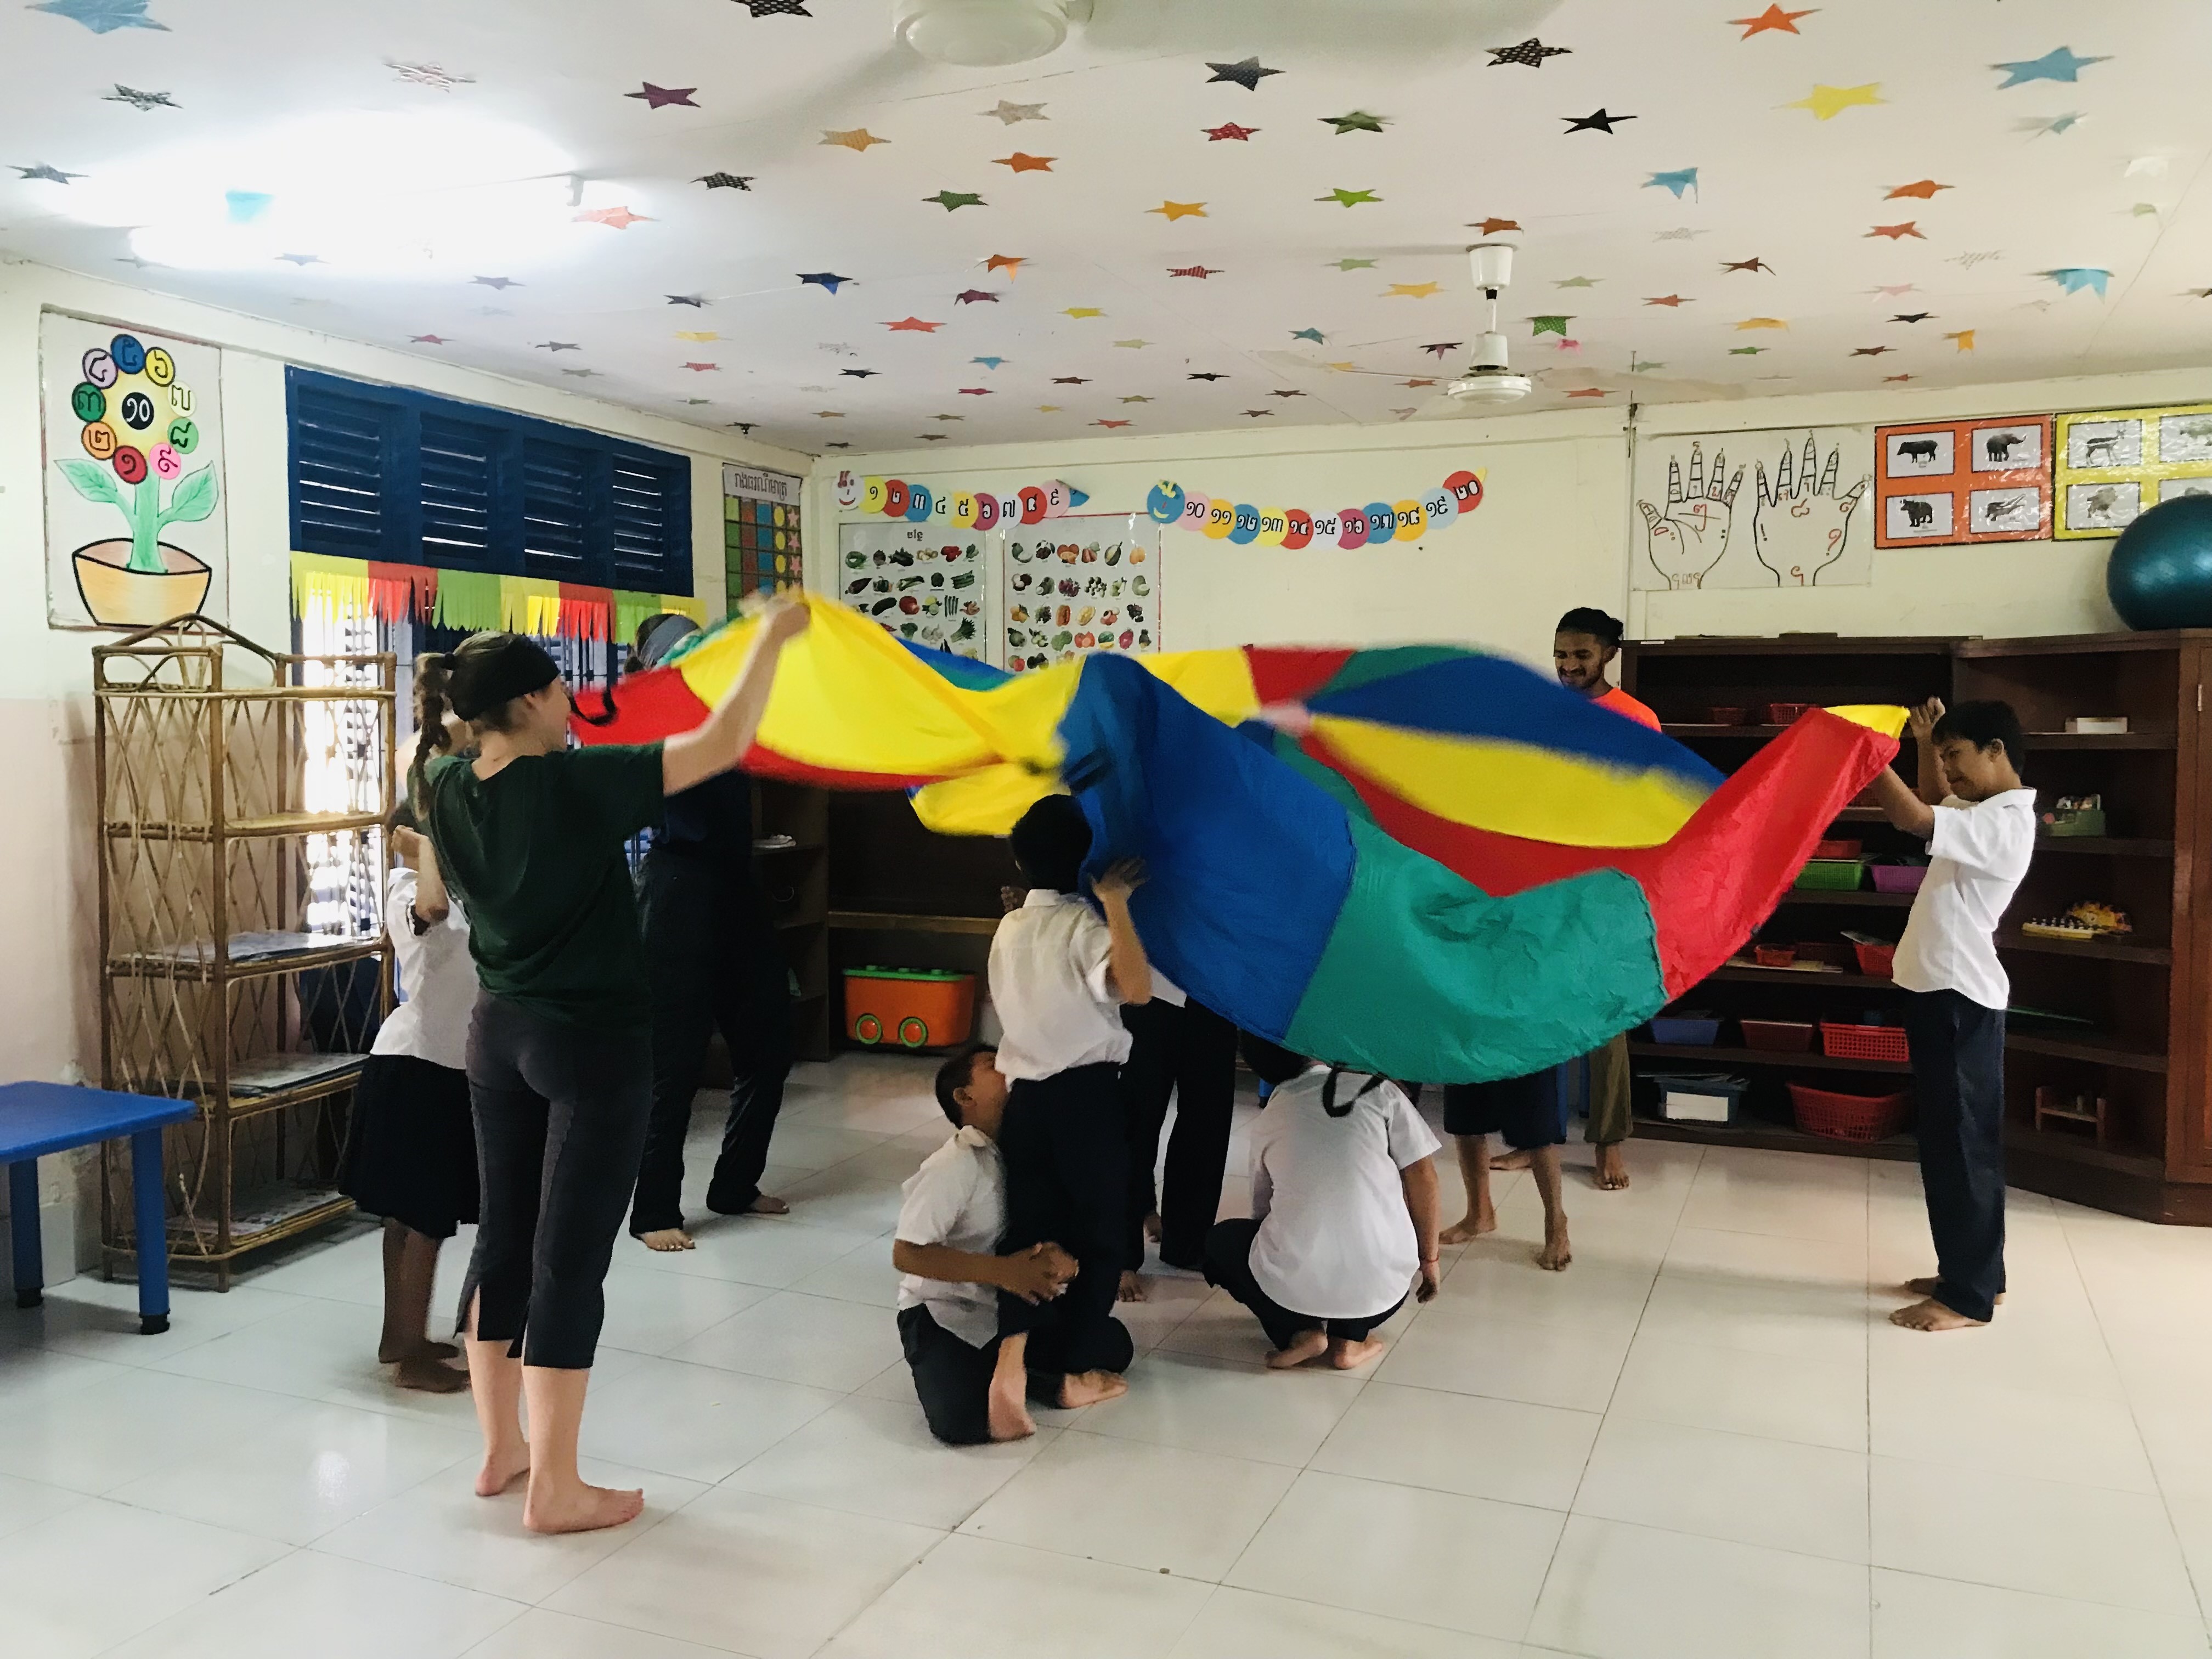  PAW participants Courtney Reid and Johann Gnanapragasam play parachute games with a primary class in Phnom Penh, Cambodia.